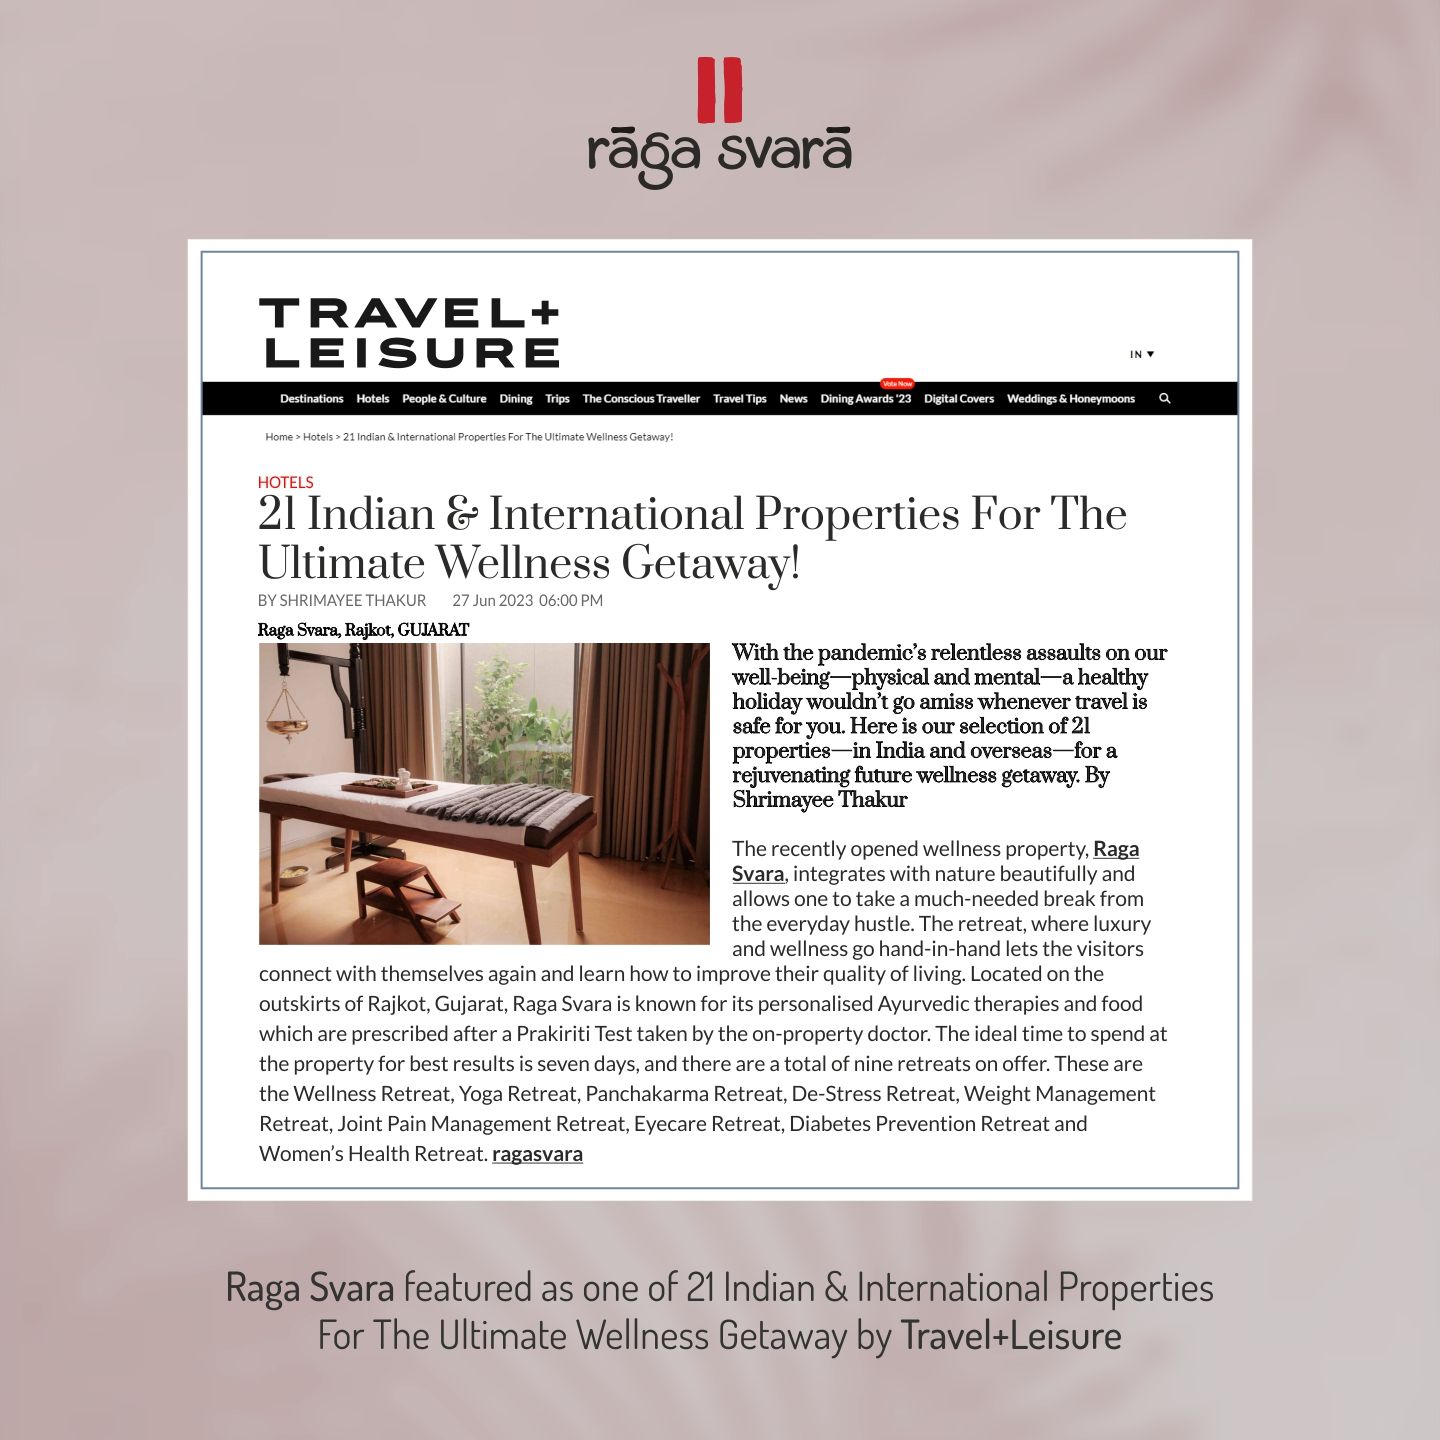 Featured as one of 21 Indian & International Properties For The Ultimate Wellness Getaway by Travel+Leisure